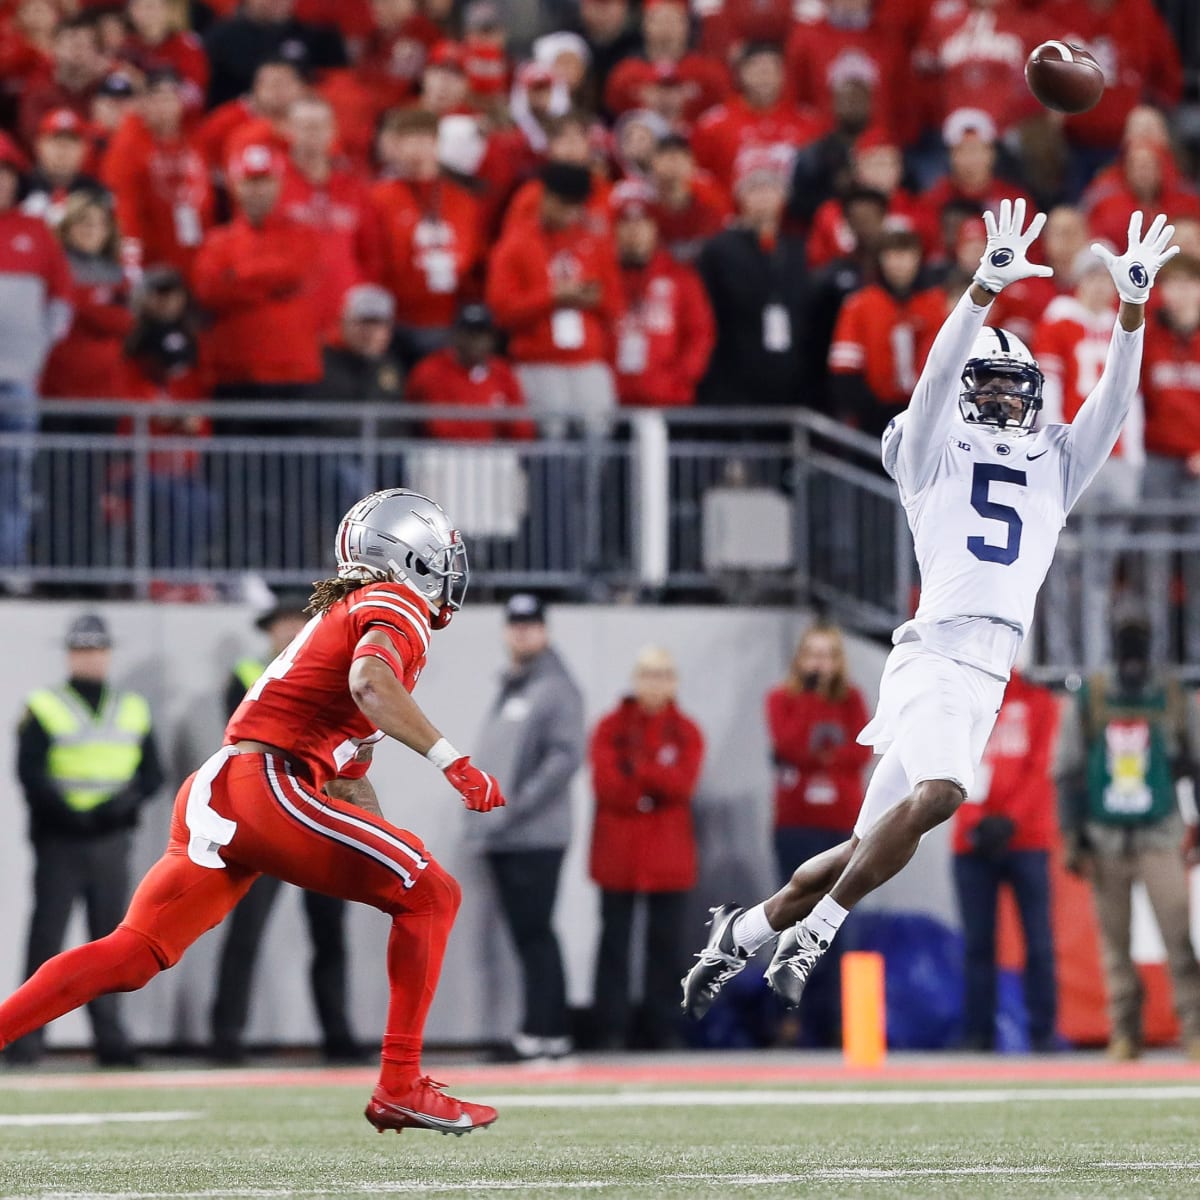 Penn State's Jahan Dotson makes ridiculous one-handed catch